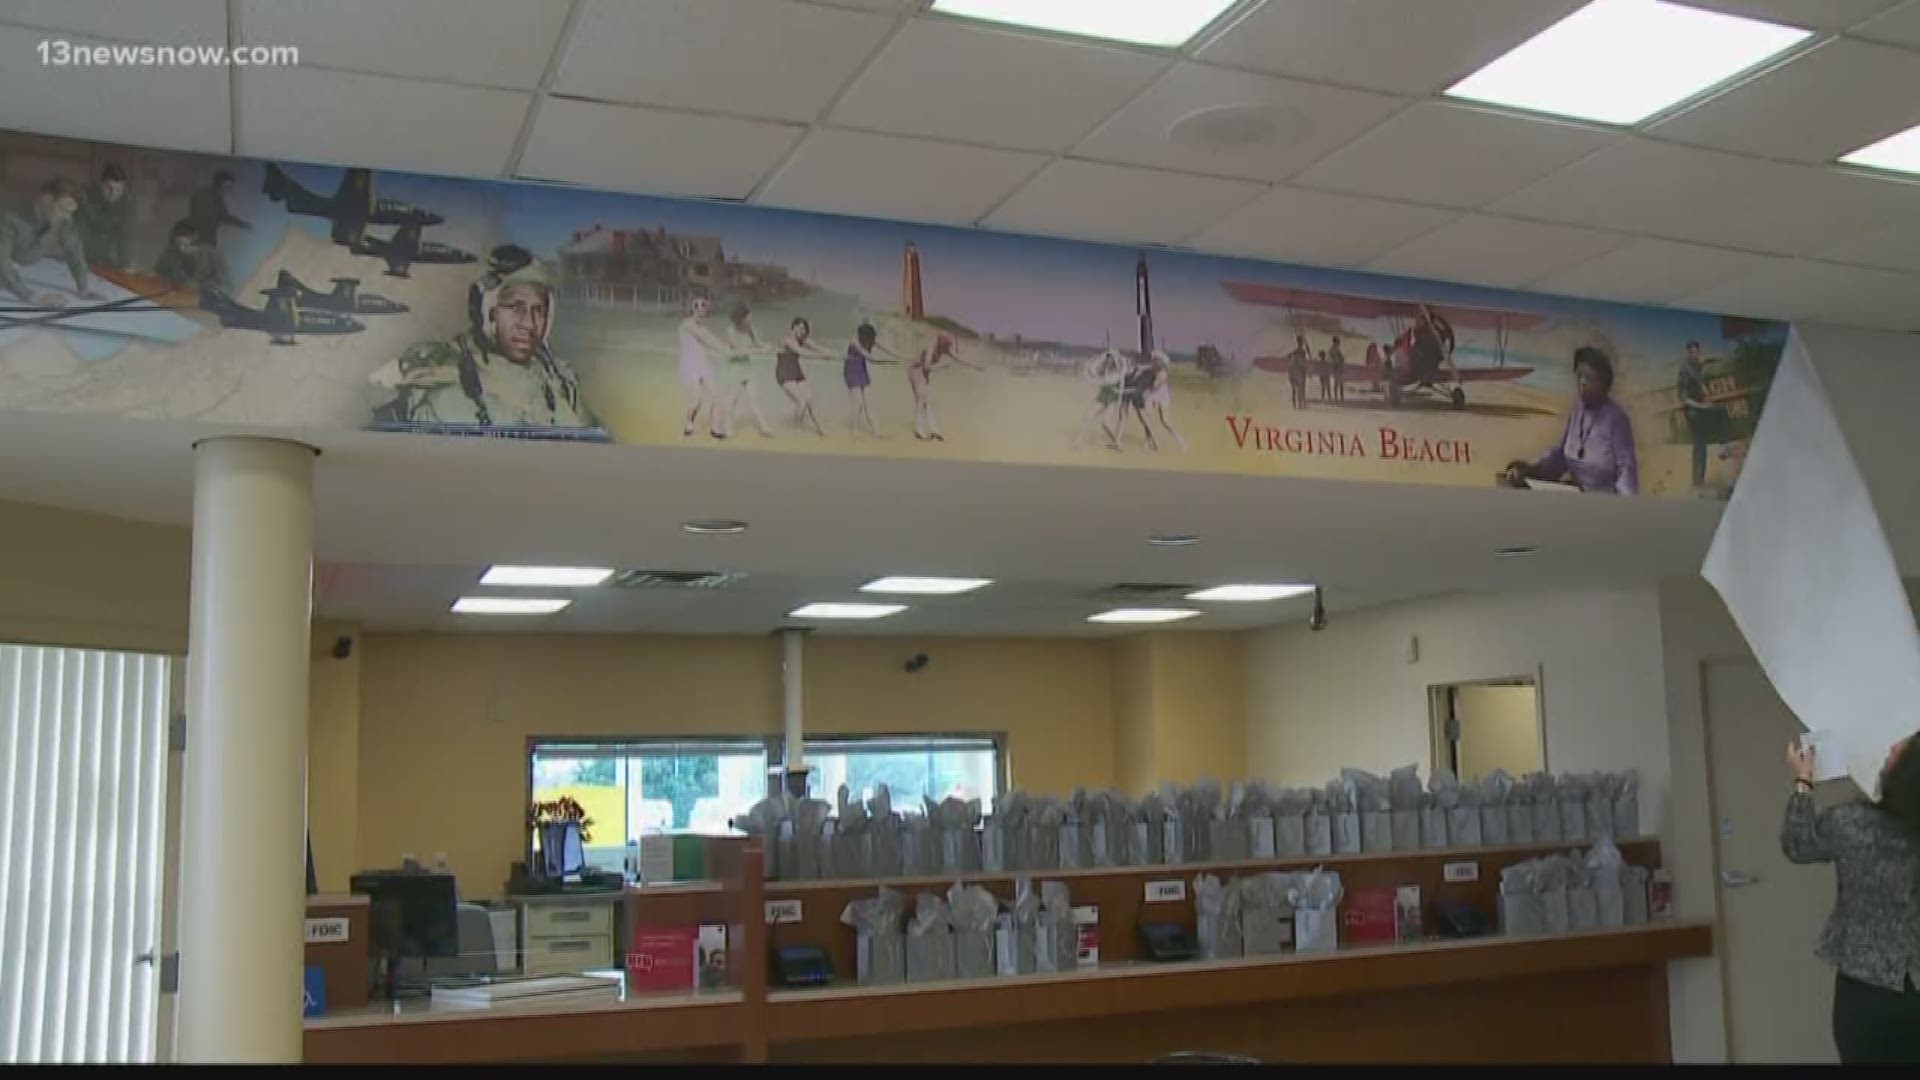 A Wells Fargo in Virginia Beach worked with historians to create a mural and honor the area's history.